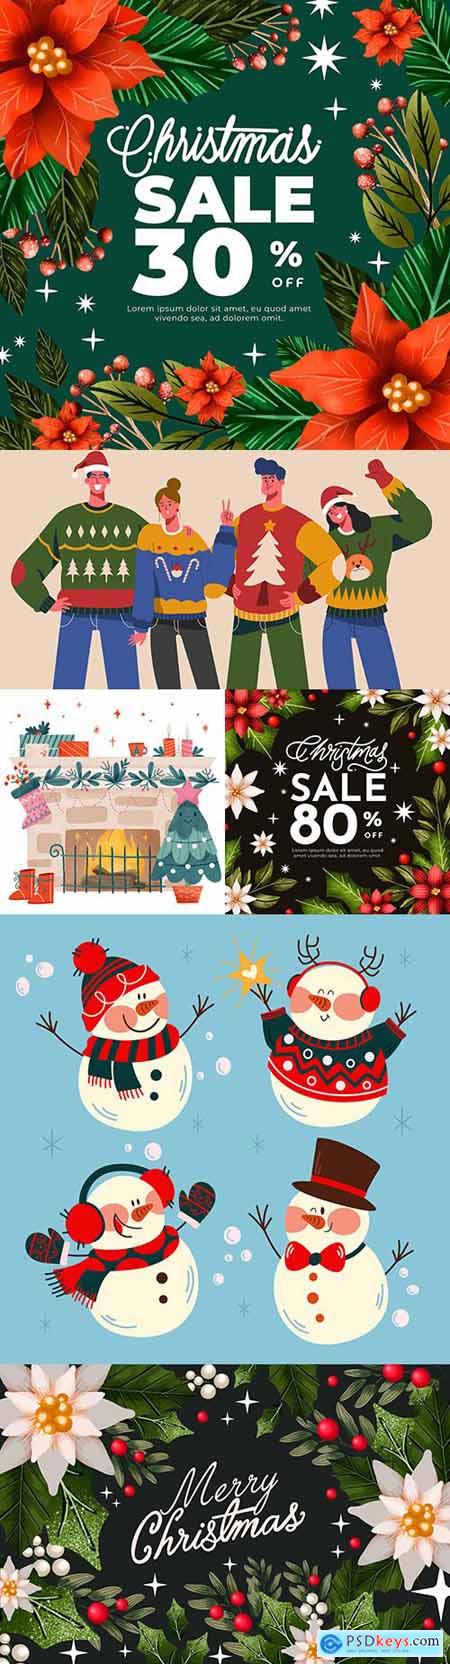 Christmas special sales and cute characters flat design